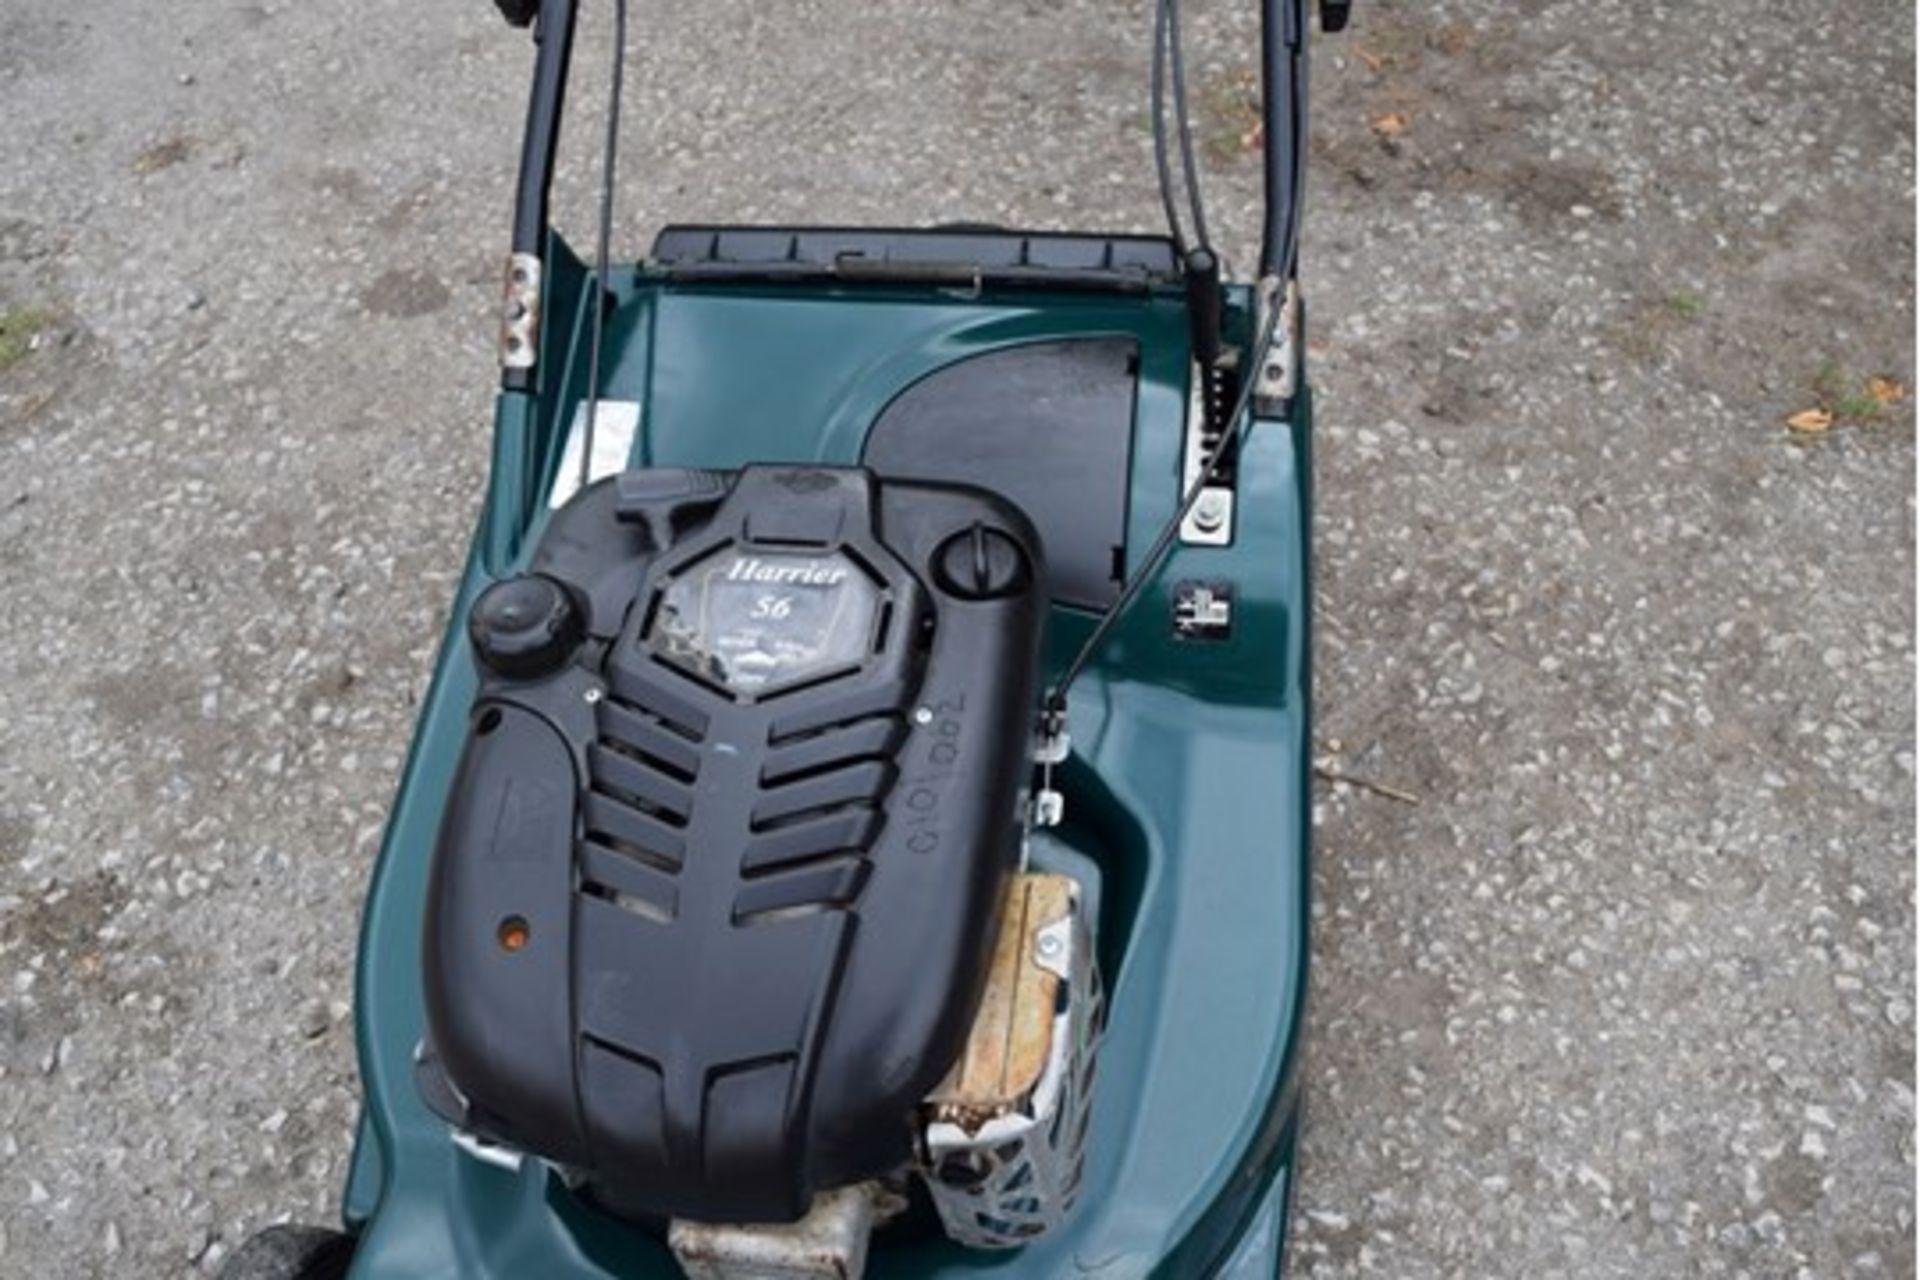 2008 Hayter Harrier 56 Auto Drive Variable Speed 22" Lawn Mower - Image 2 of 6